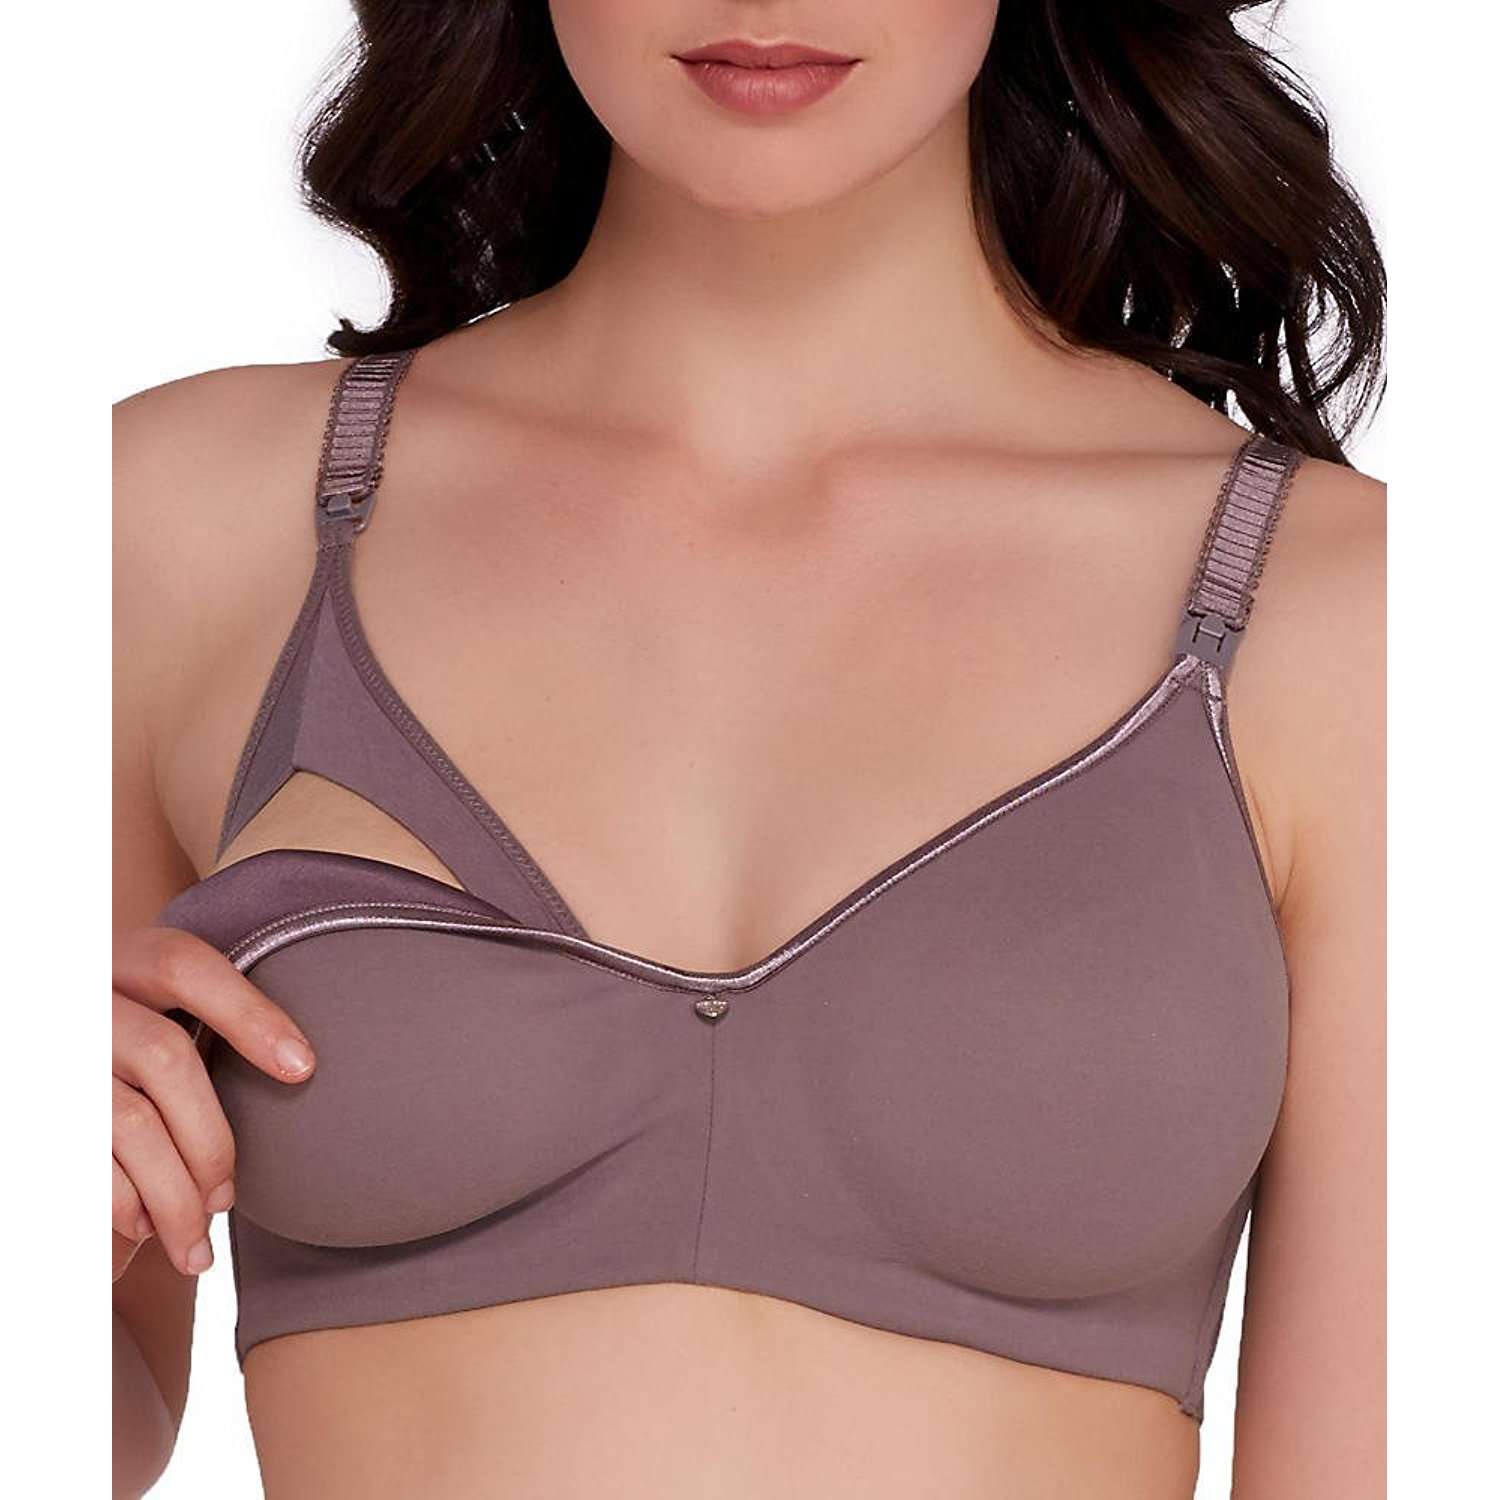 Maternity bras 38G - 12 products